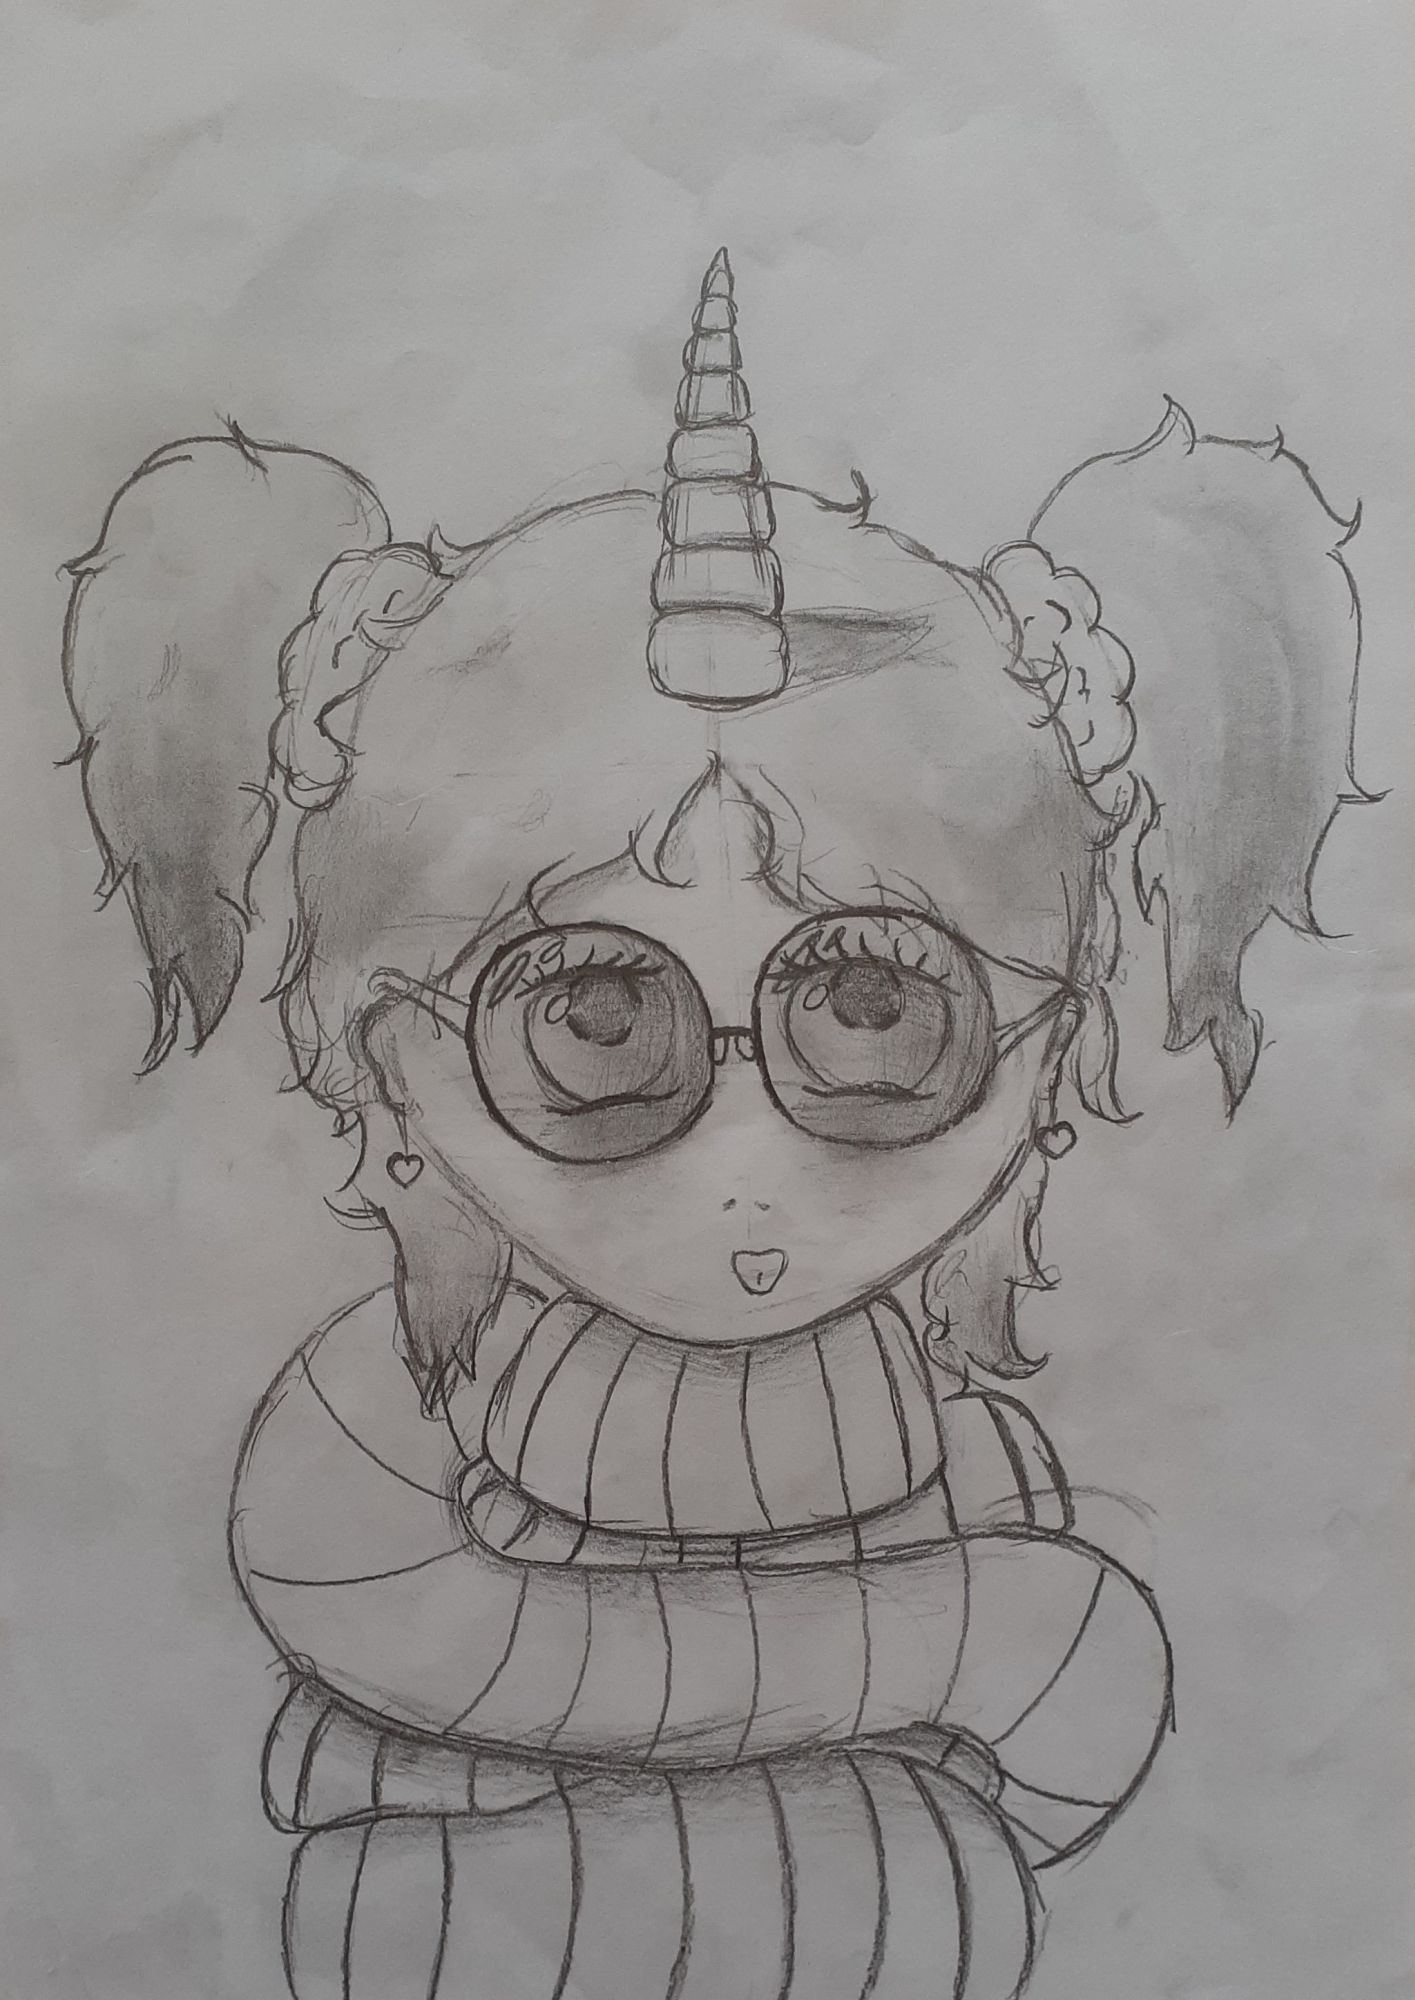 Student artwork - A girl with a unicorn horn